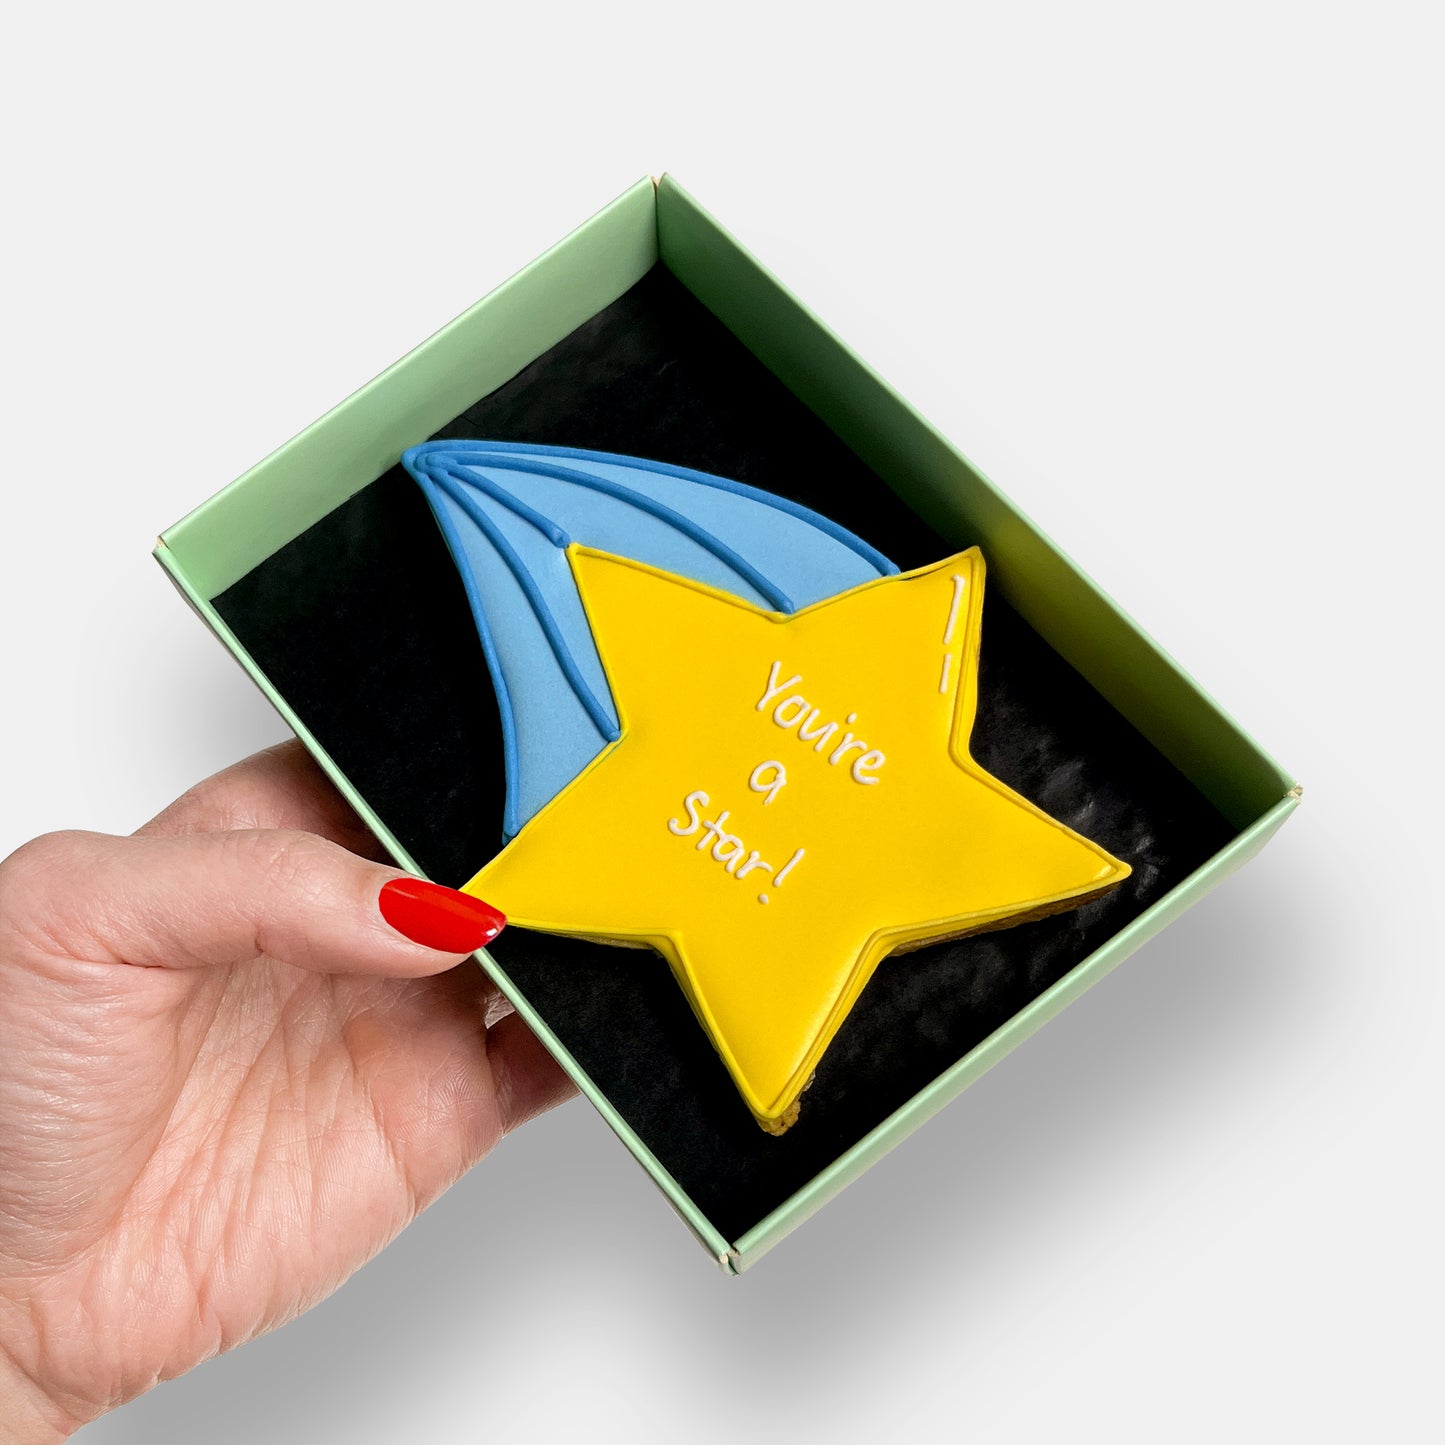 Personalised You're A Star Letterbox Cookie